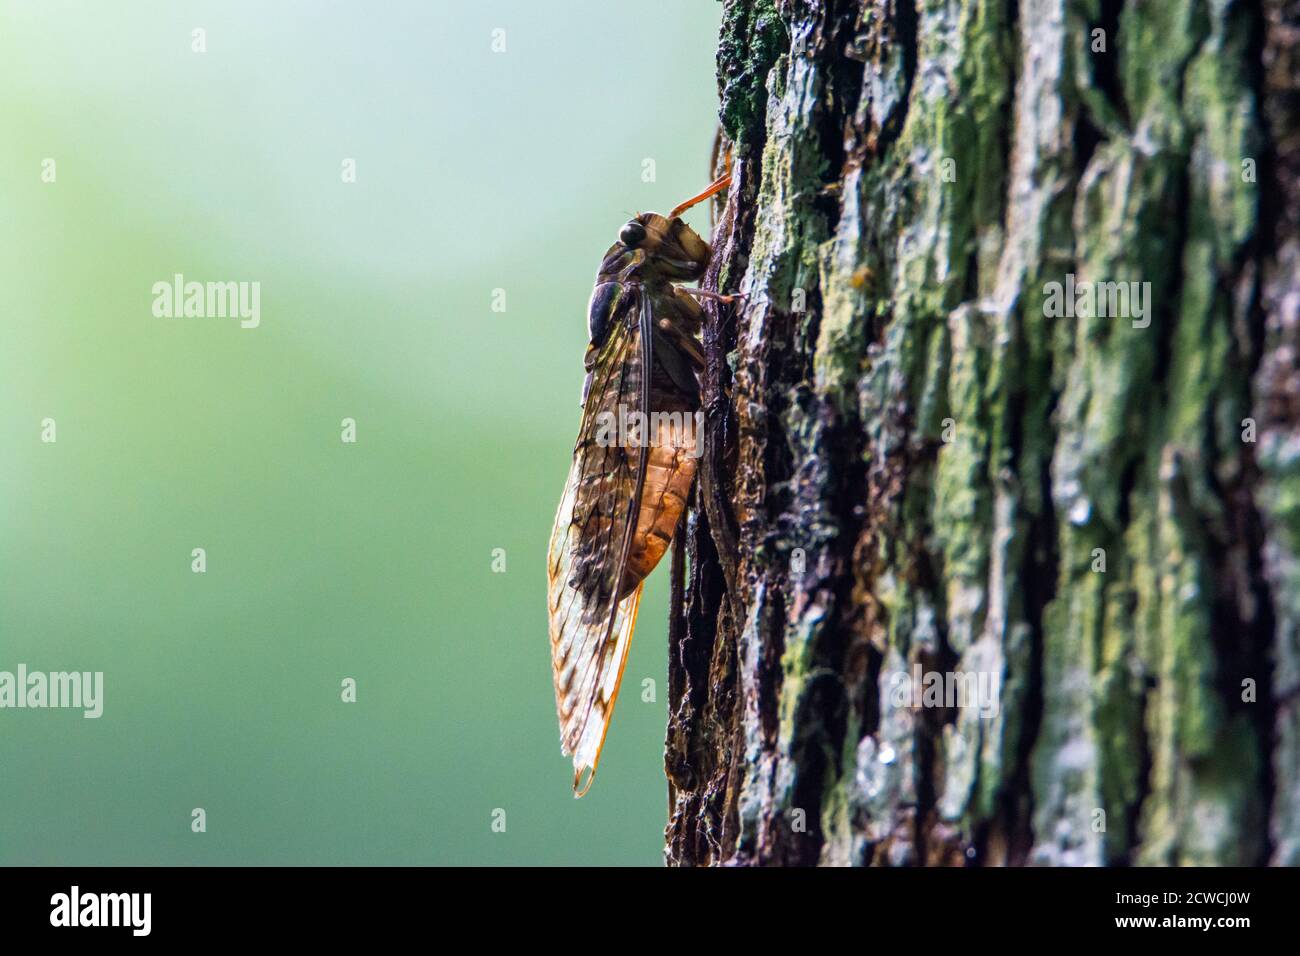 Cicada insect closeup side view, colorful and noisy insect Stock Photo